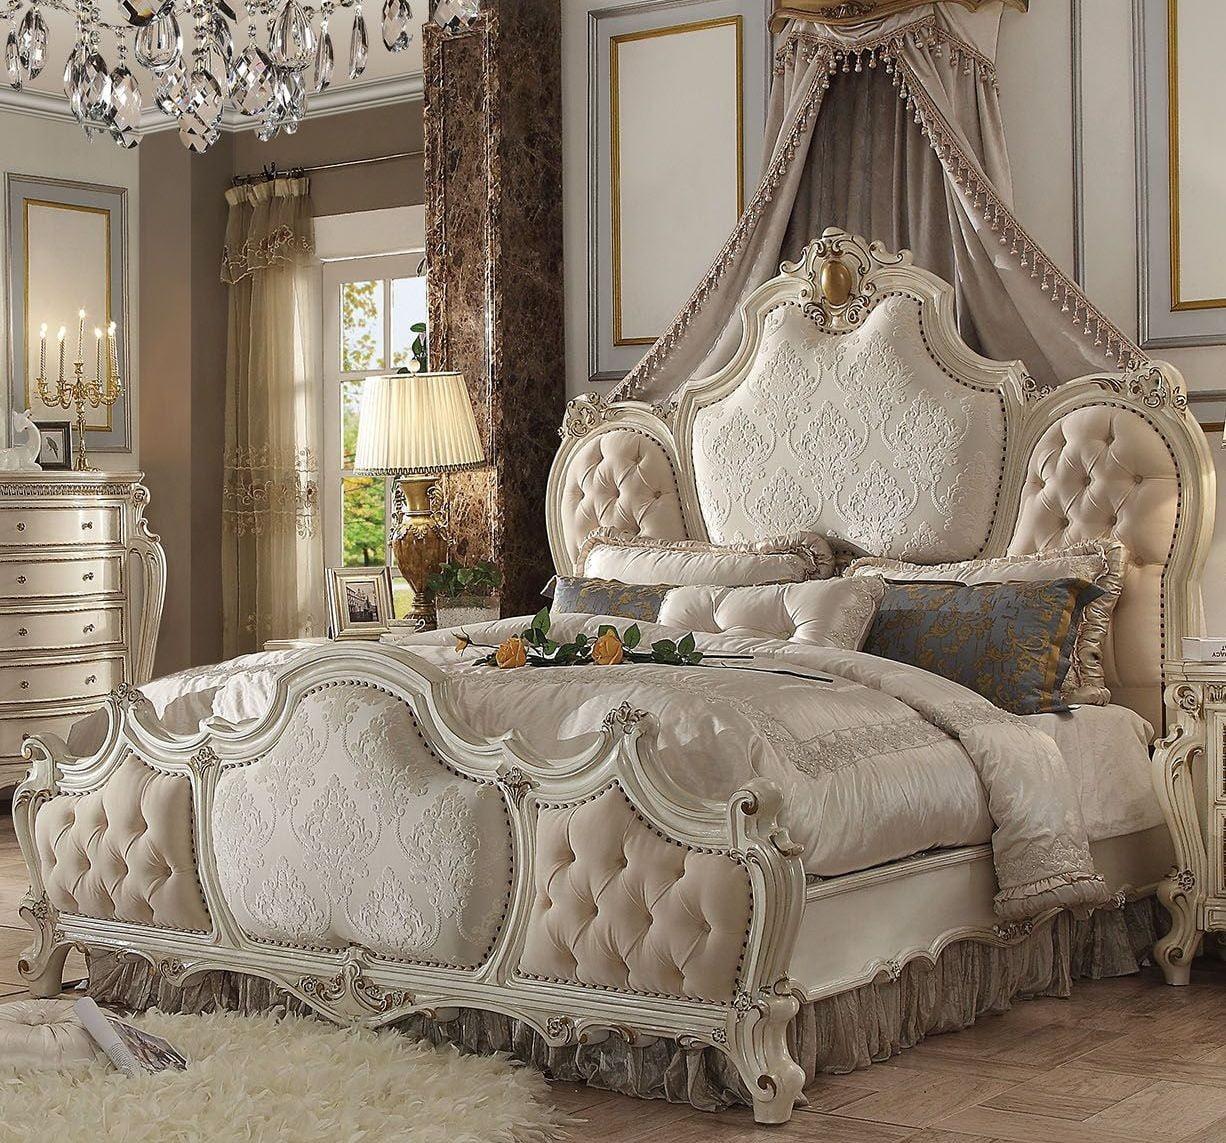 

    
Dili Tufted Antique Pearl Standard Queen Bed Vintage Classic
